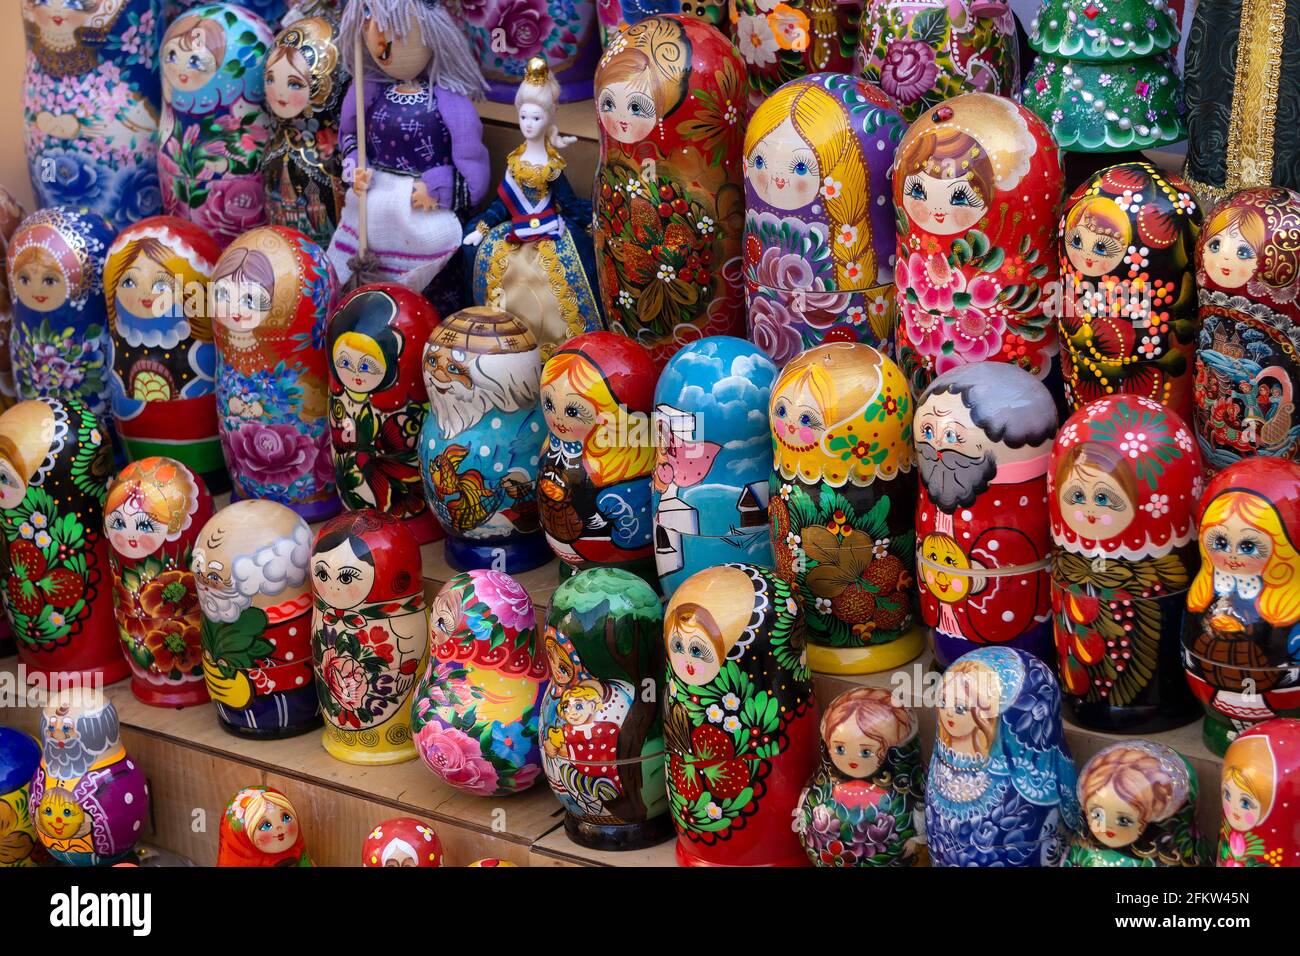 Moscow, Russia - May 4, 2021: Russian doll or nesting doll and matryoshka. Russian national craft souvenir and cultural toy made of wood. High quality photo Stock Photo